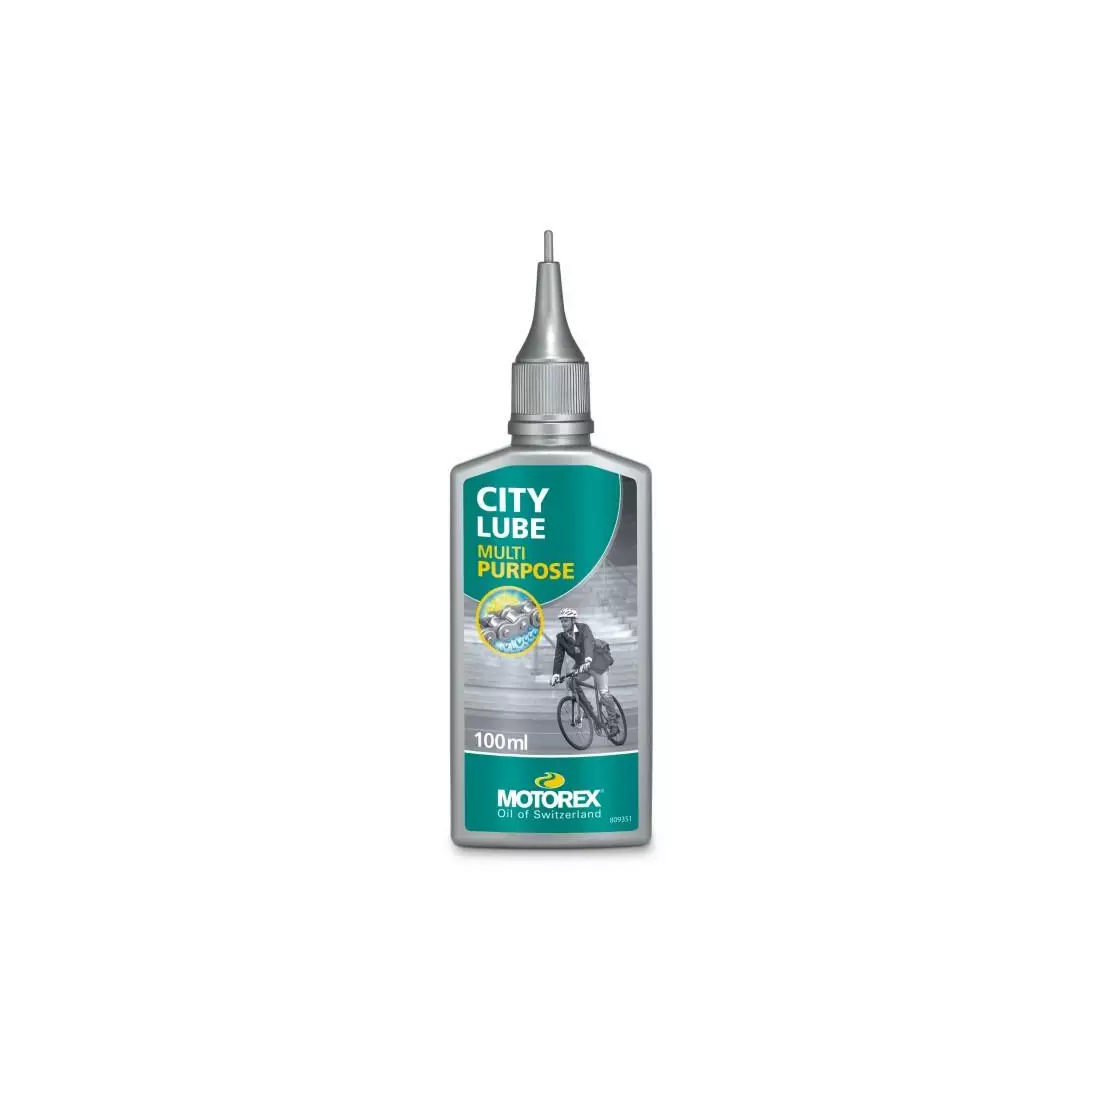 MOTOREX CITY LUBE chain lubricant, dry and wet conditions, oil 100 ml